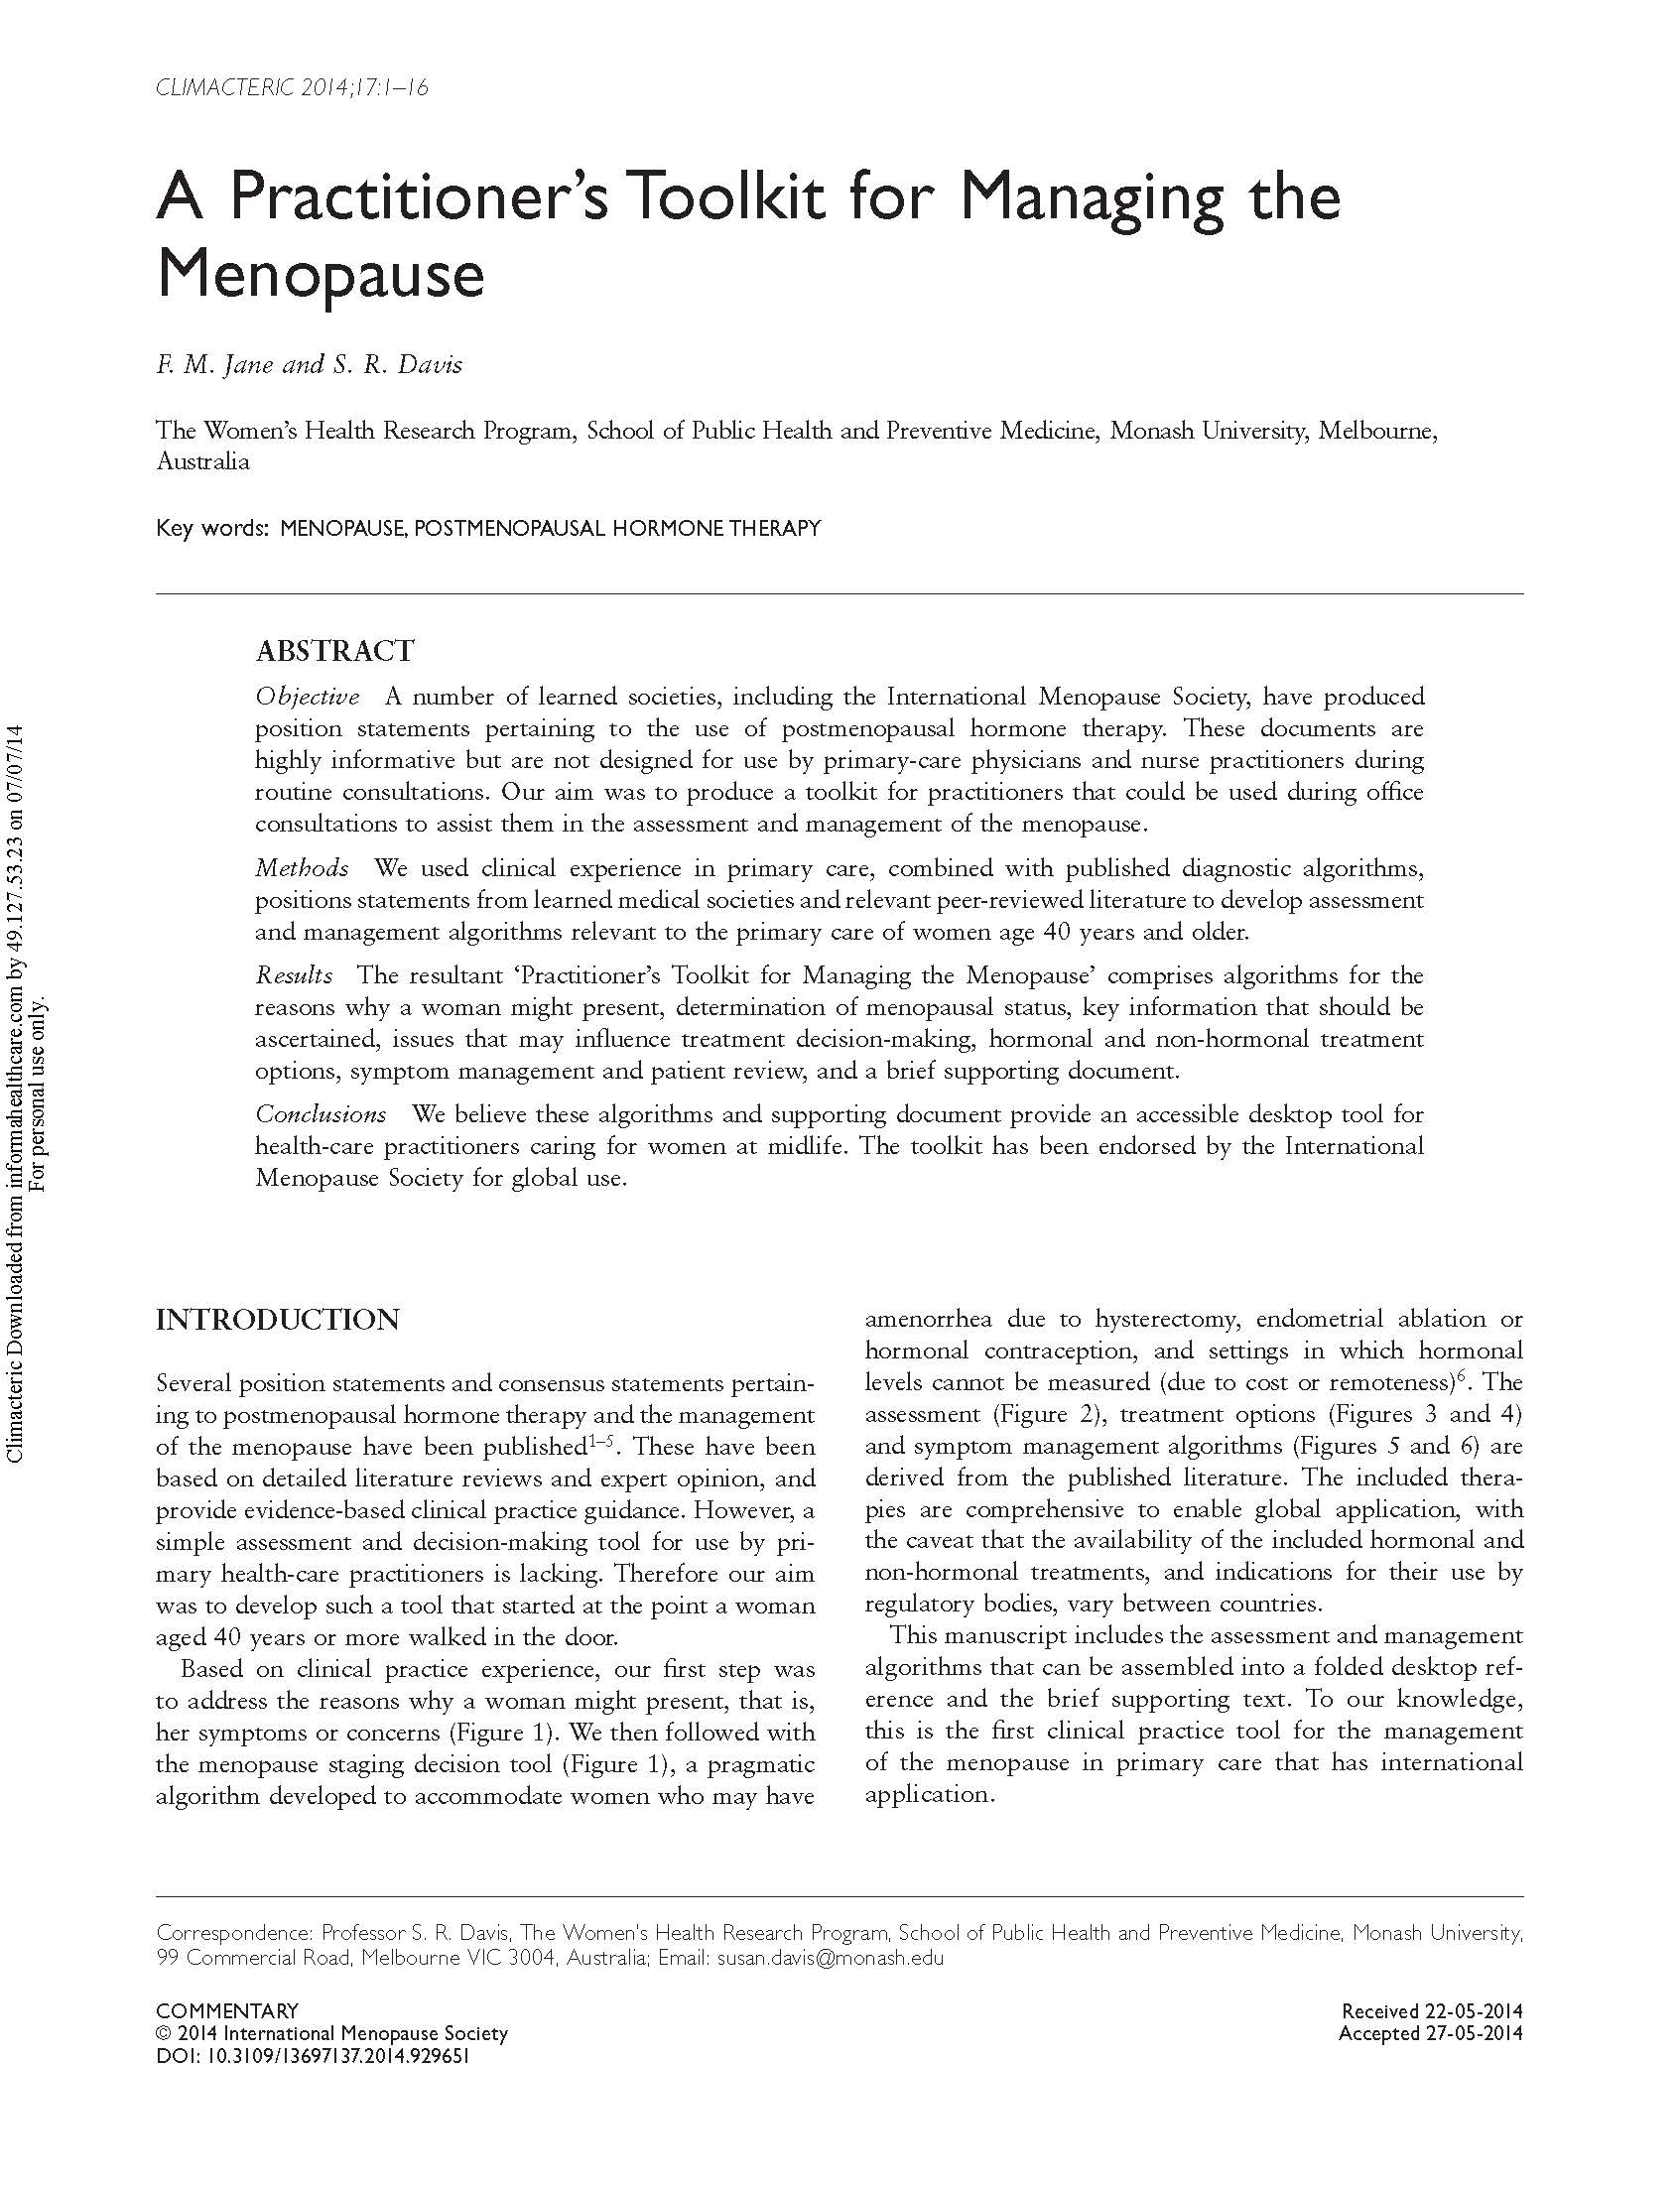 A Practitioner’s Toolkit for Managing the Menopause